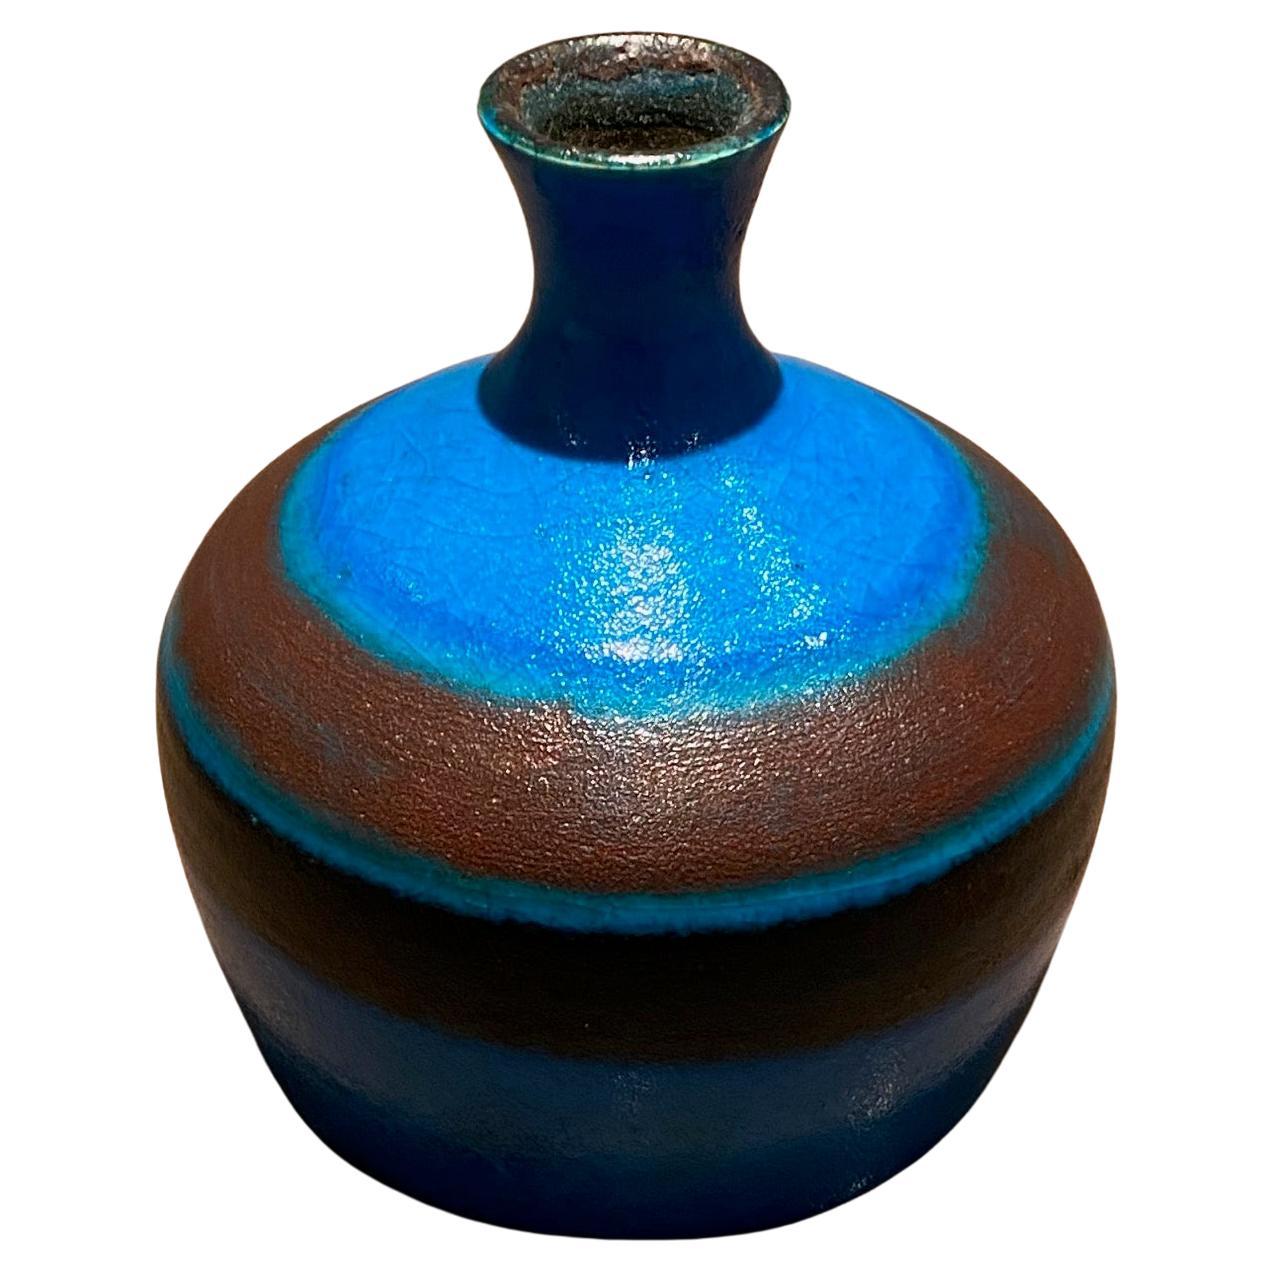 Shiny blue & brown enameled small vase by Bruno Gambone
Measures: H 15 cm x L 14 cm
Artist-signed Gambone Italy at base.

